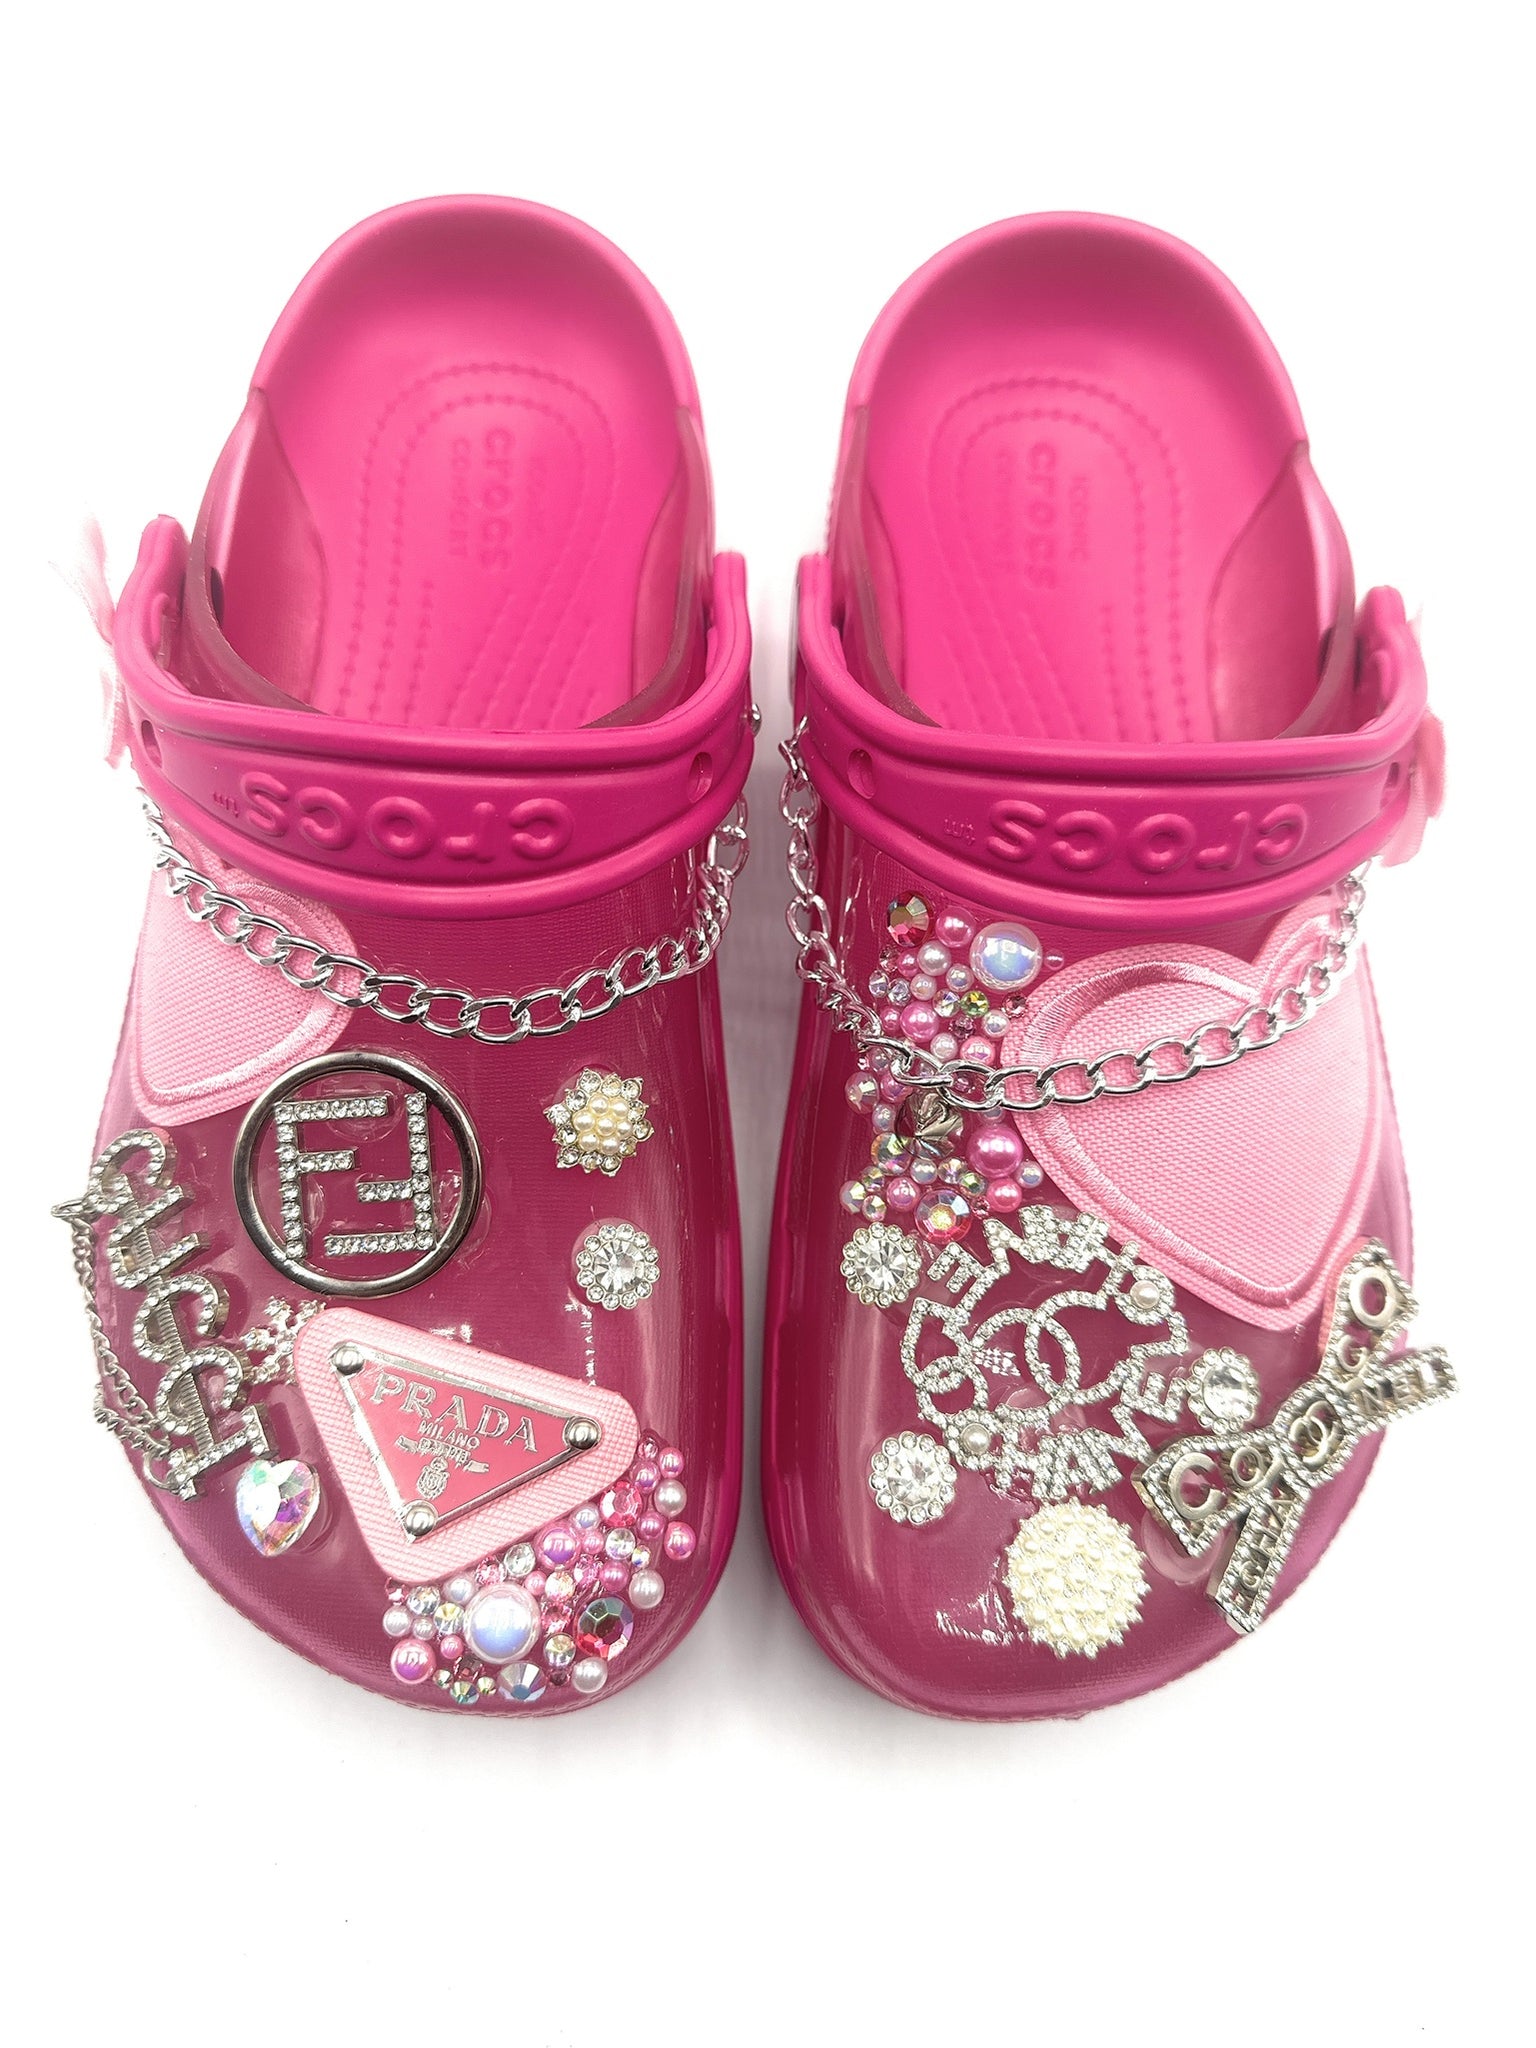 HOT PINK TRANSLUCENT CROCS WITH DESIGNER CHARMS – PinkIce Novelty